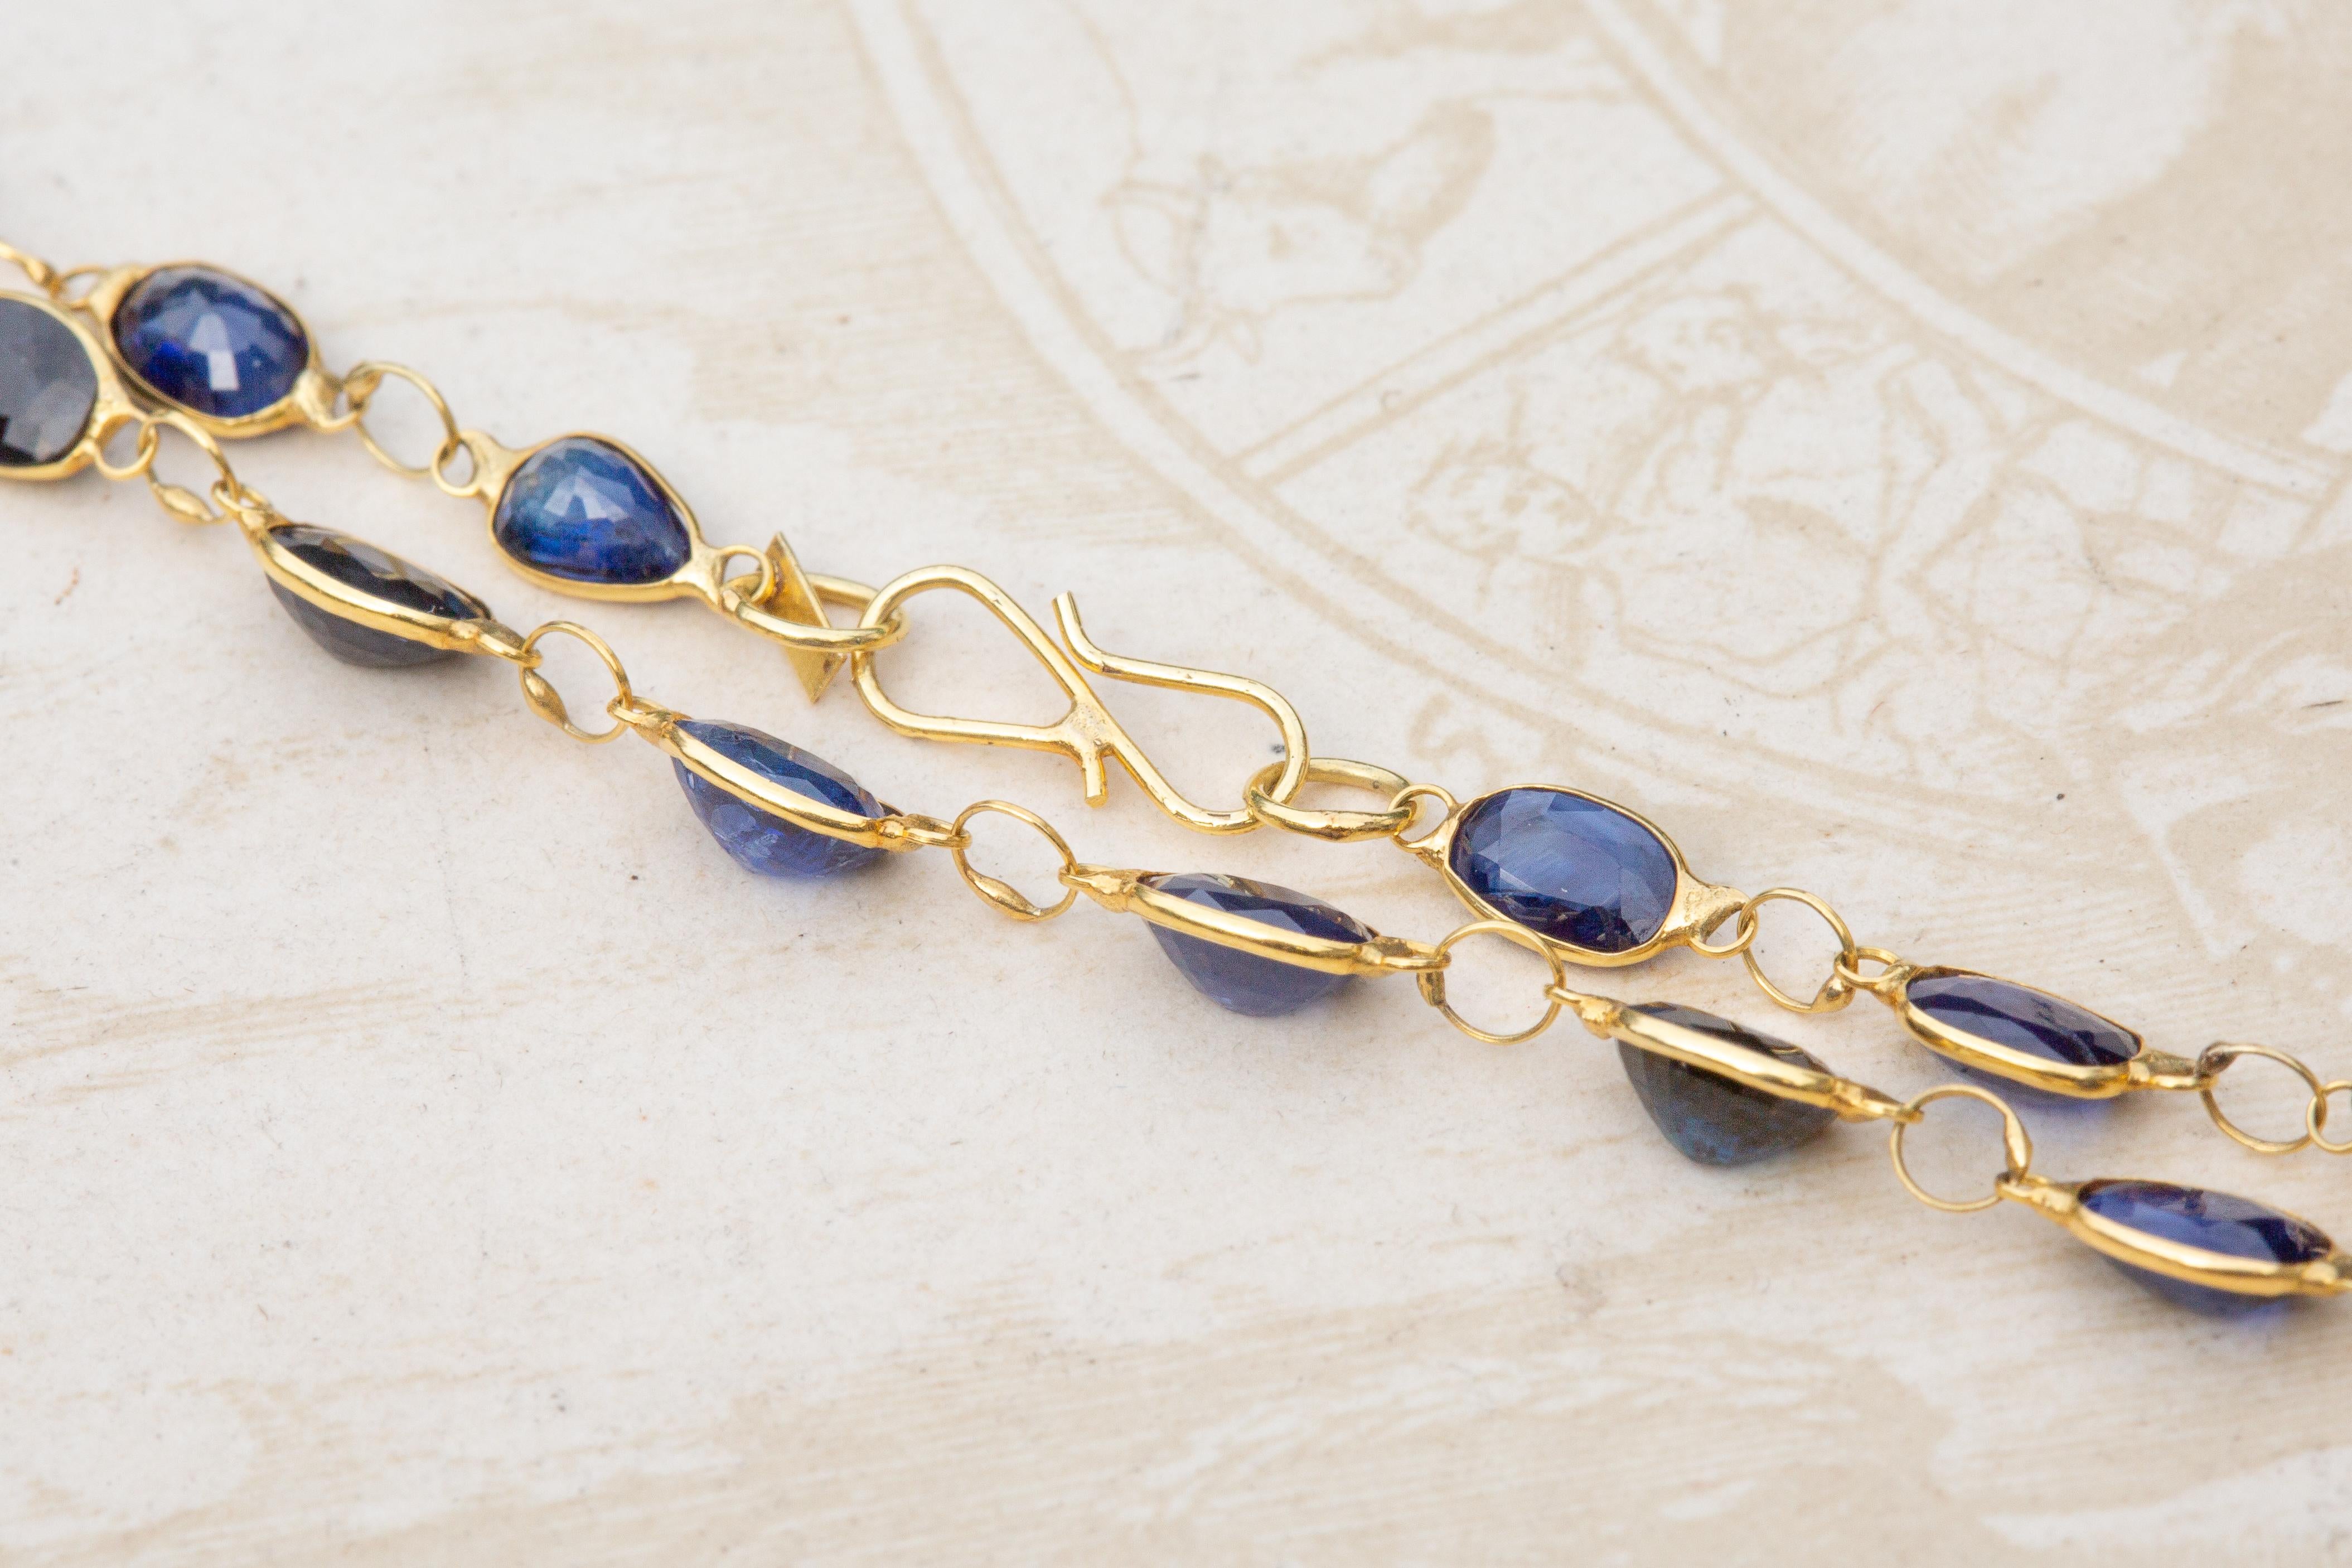 Vintage Mixed-Cut Natural Sapphire Necklace Chain 13cts Total In Good Condition For Sale In London, GB